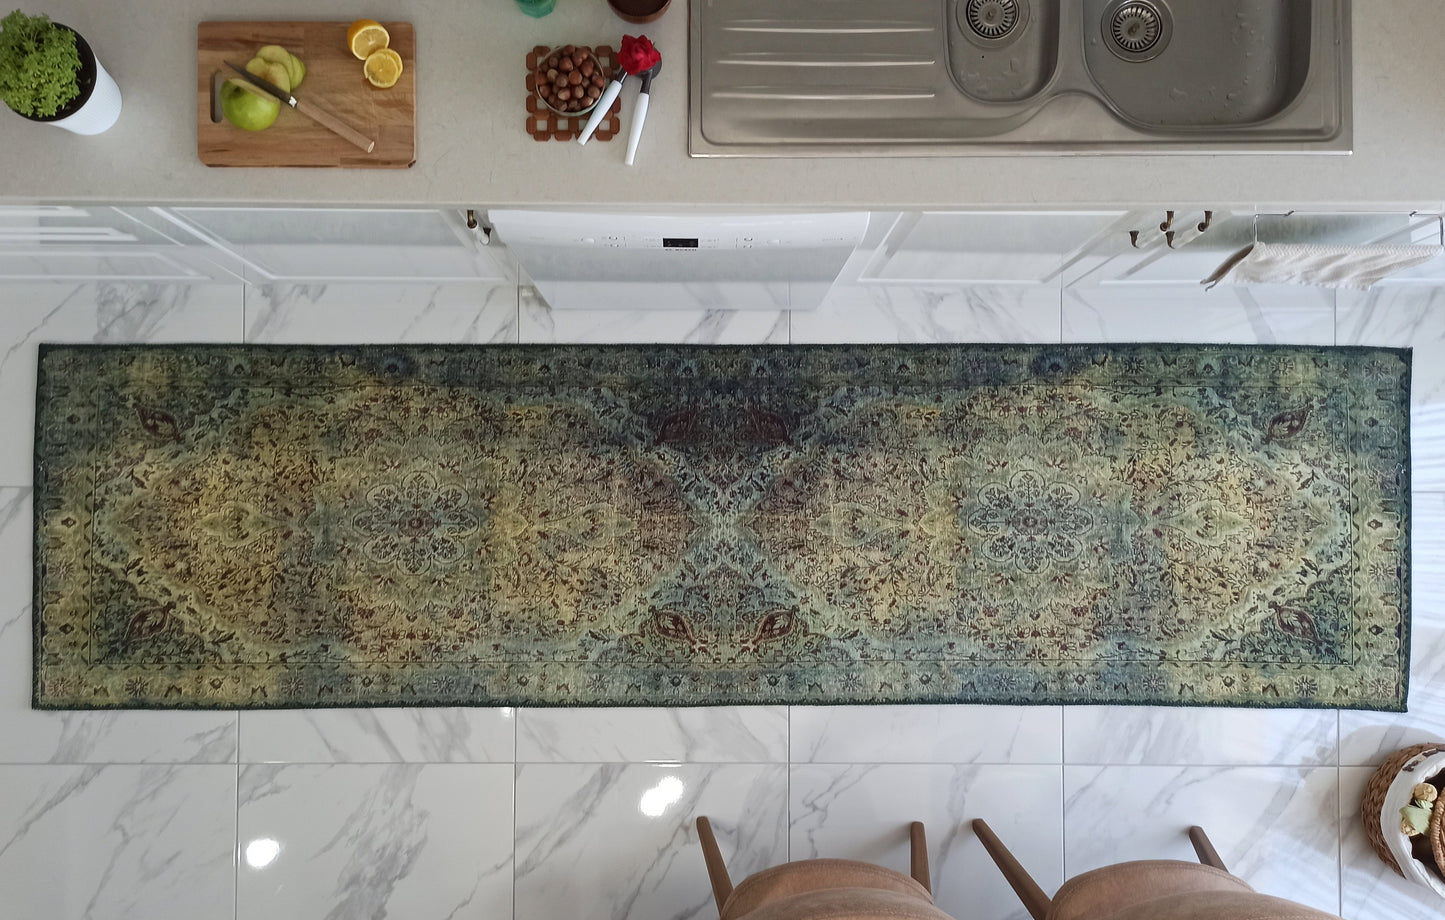 RENE Runner | Green Oriental Persian Runner, Vintage Hand-knotted texture, Kitchen decor, Over-dyed Faded Floral Motifs, Luxury Hallway rug